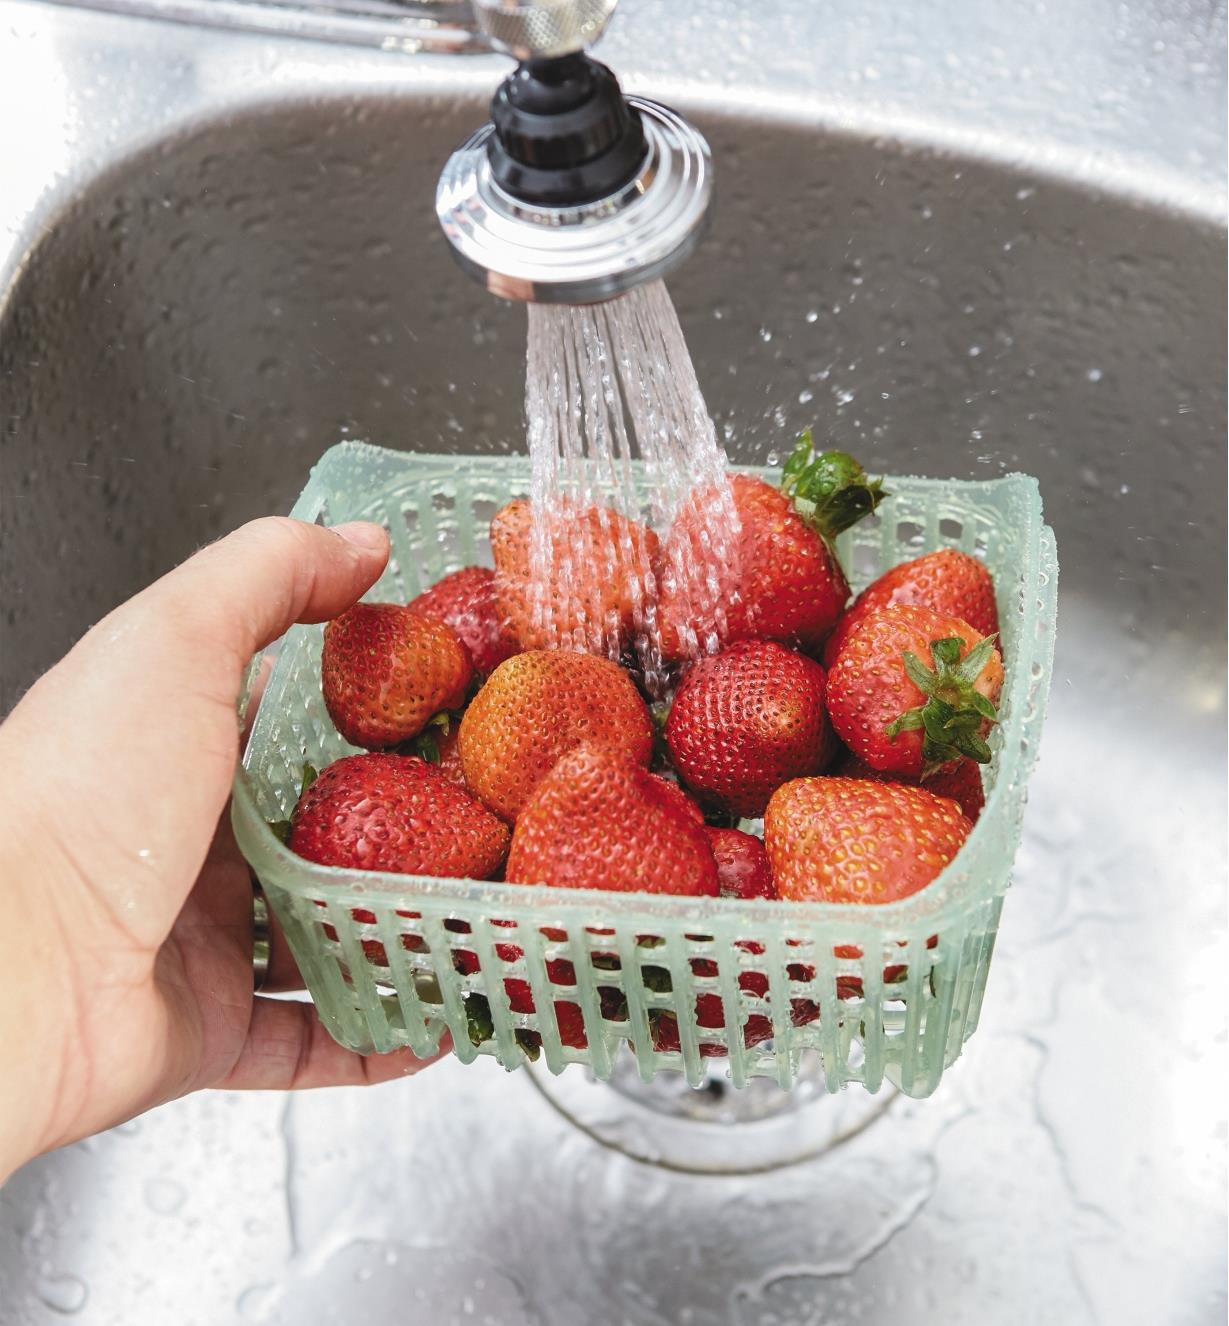 Rinsing strawberries in the 1.6 qt. (1.5 litre) Produce Keeper